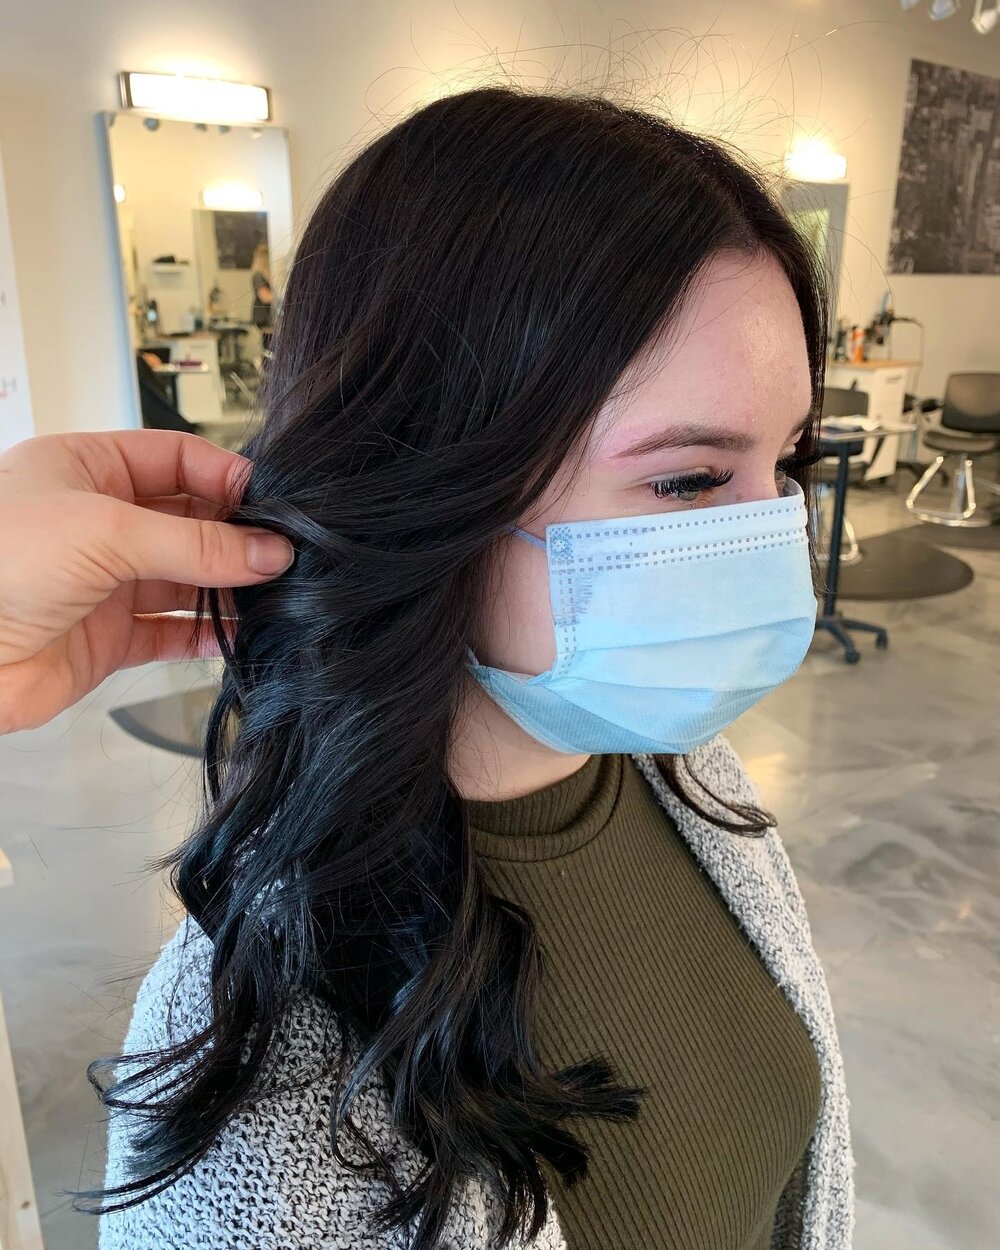 How about this deep, rich colour?⁠
⁠
Maya, whipped up the perfect colour for this guest! We're all about nailling that perfect hue and having you leave the salon feeling like a million bucks!⁠
⁠
Let us work a little hair magic for you ✨ Drop us a lin